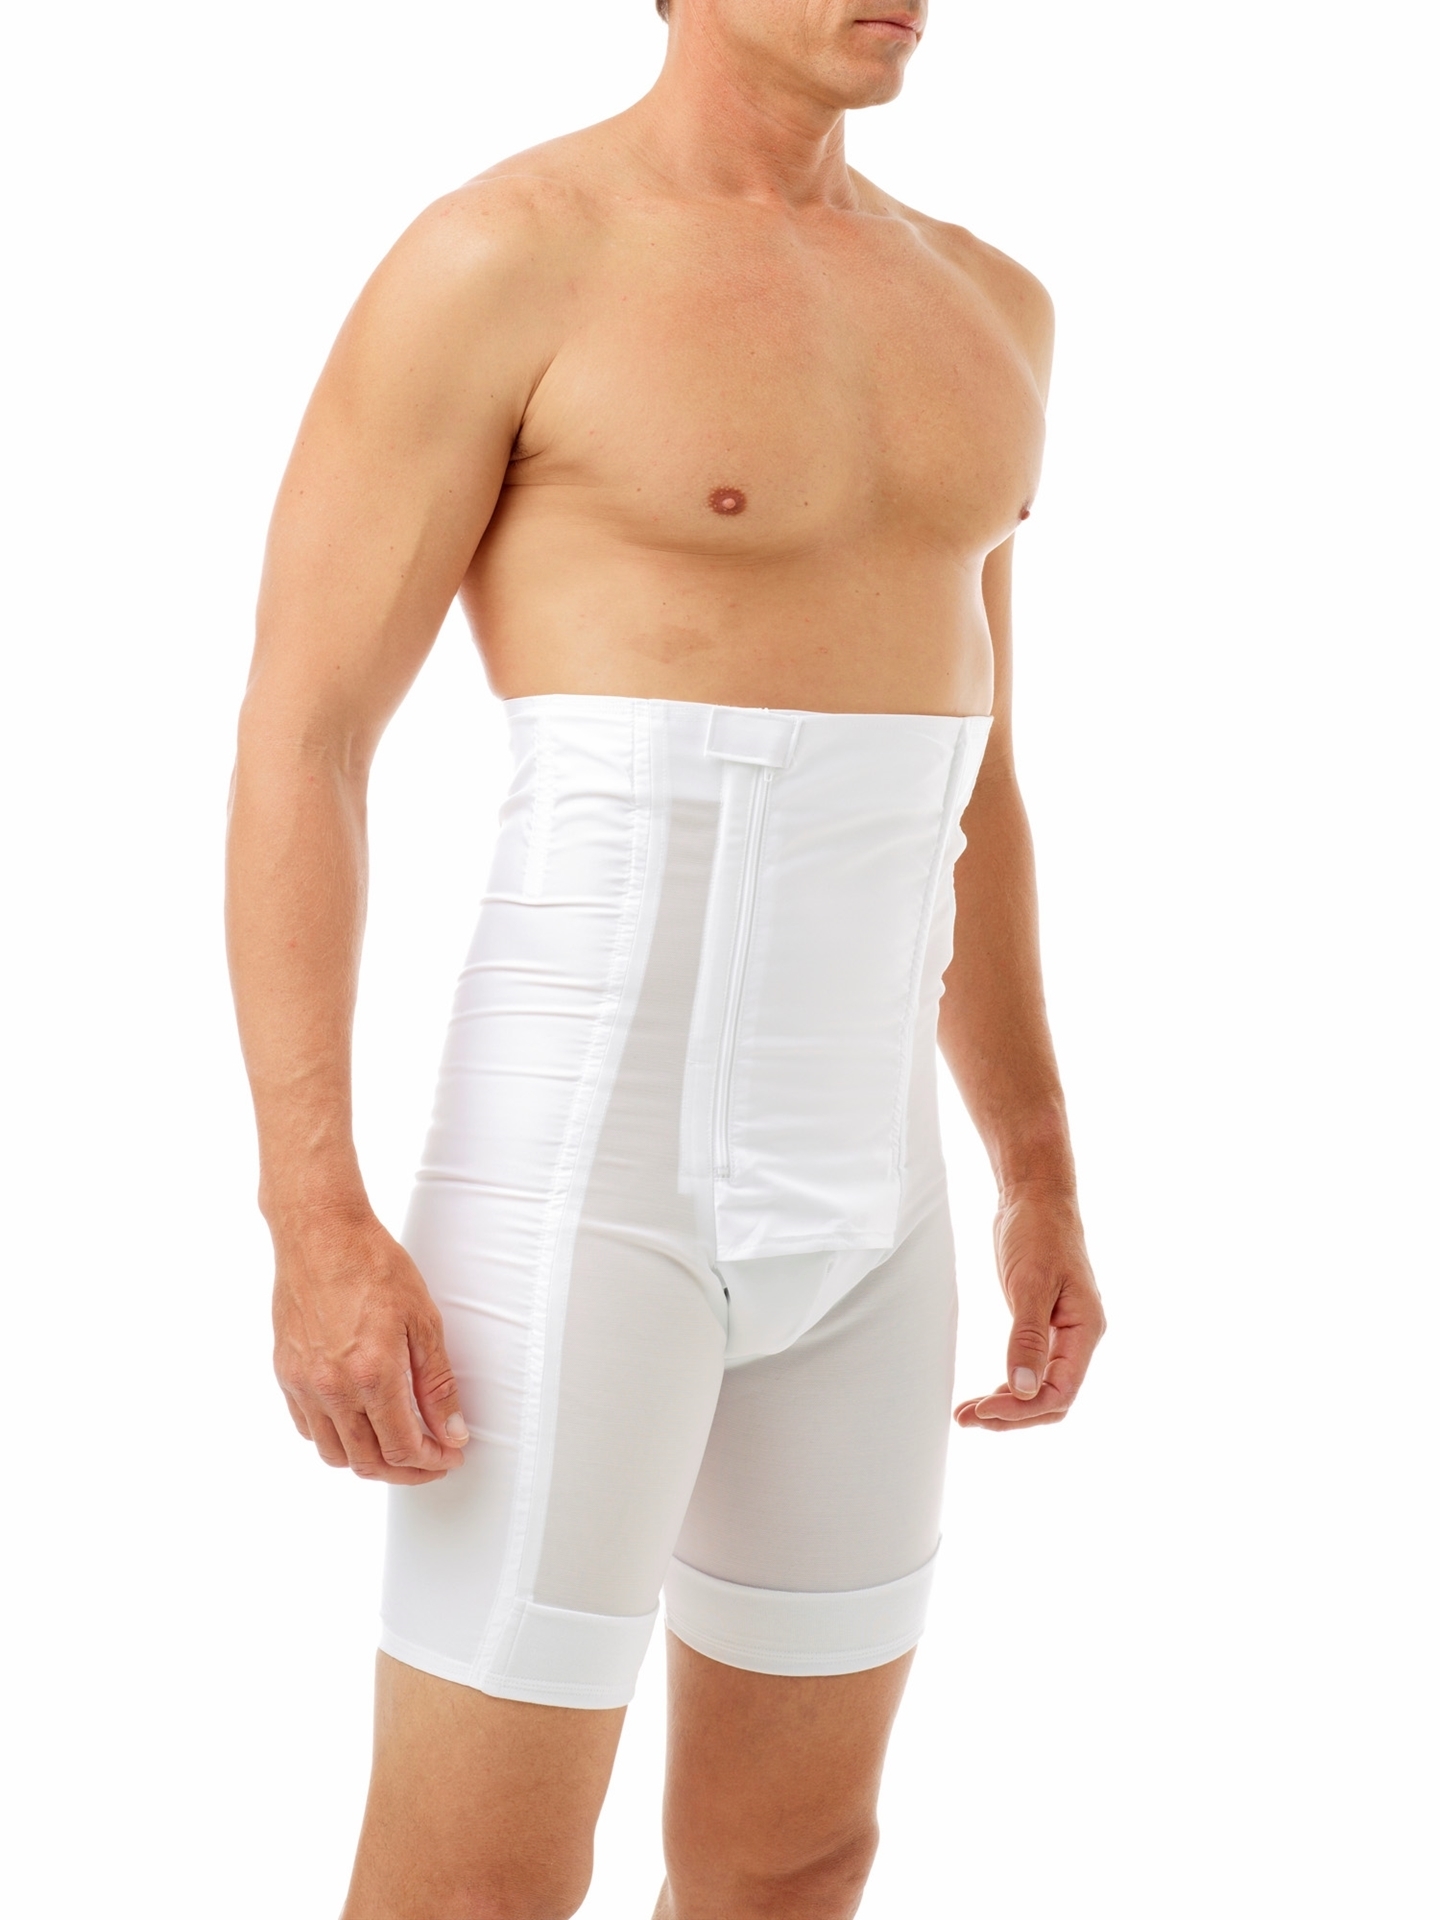 Men's waist Control girdle firm Body Shaping belt with back